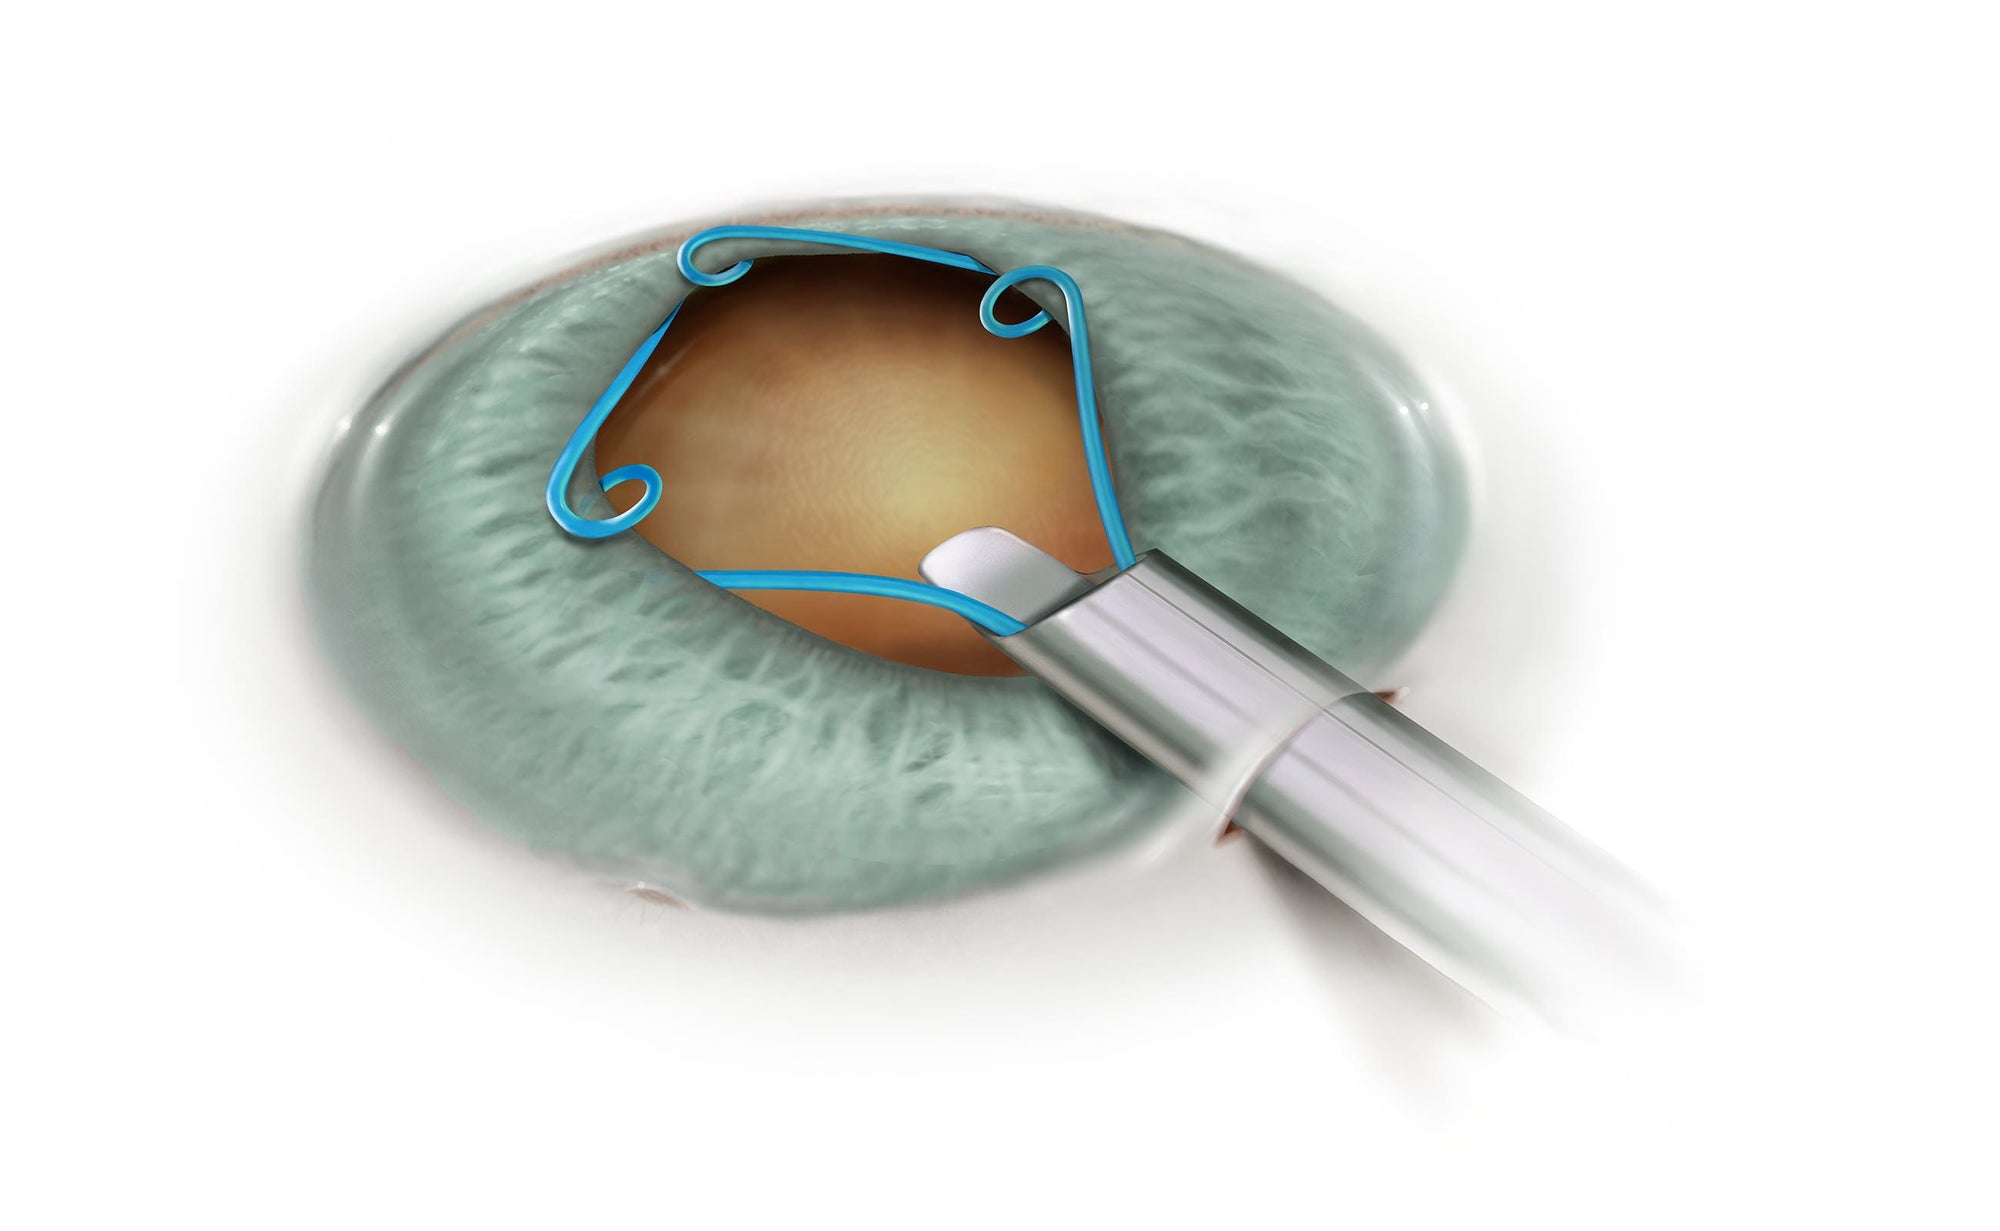 Flomax commercials contain a warning about Cataract Surgery